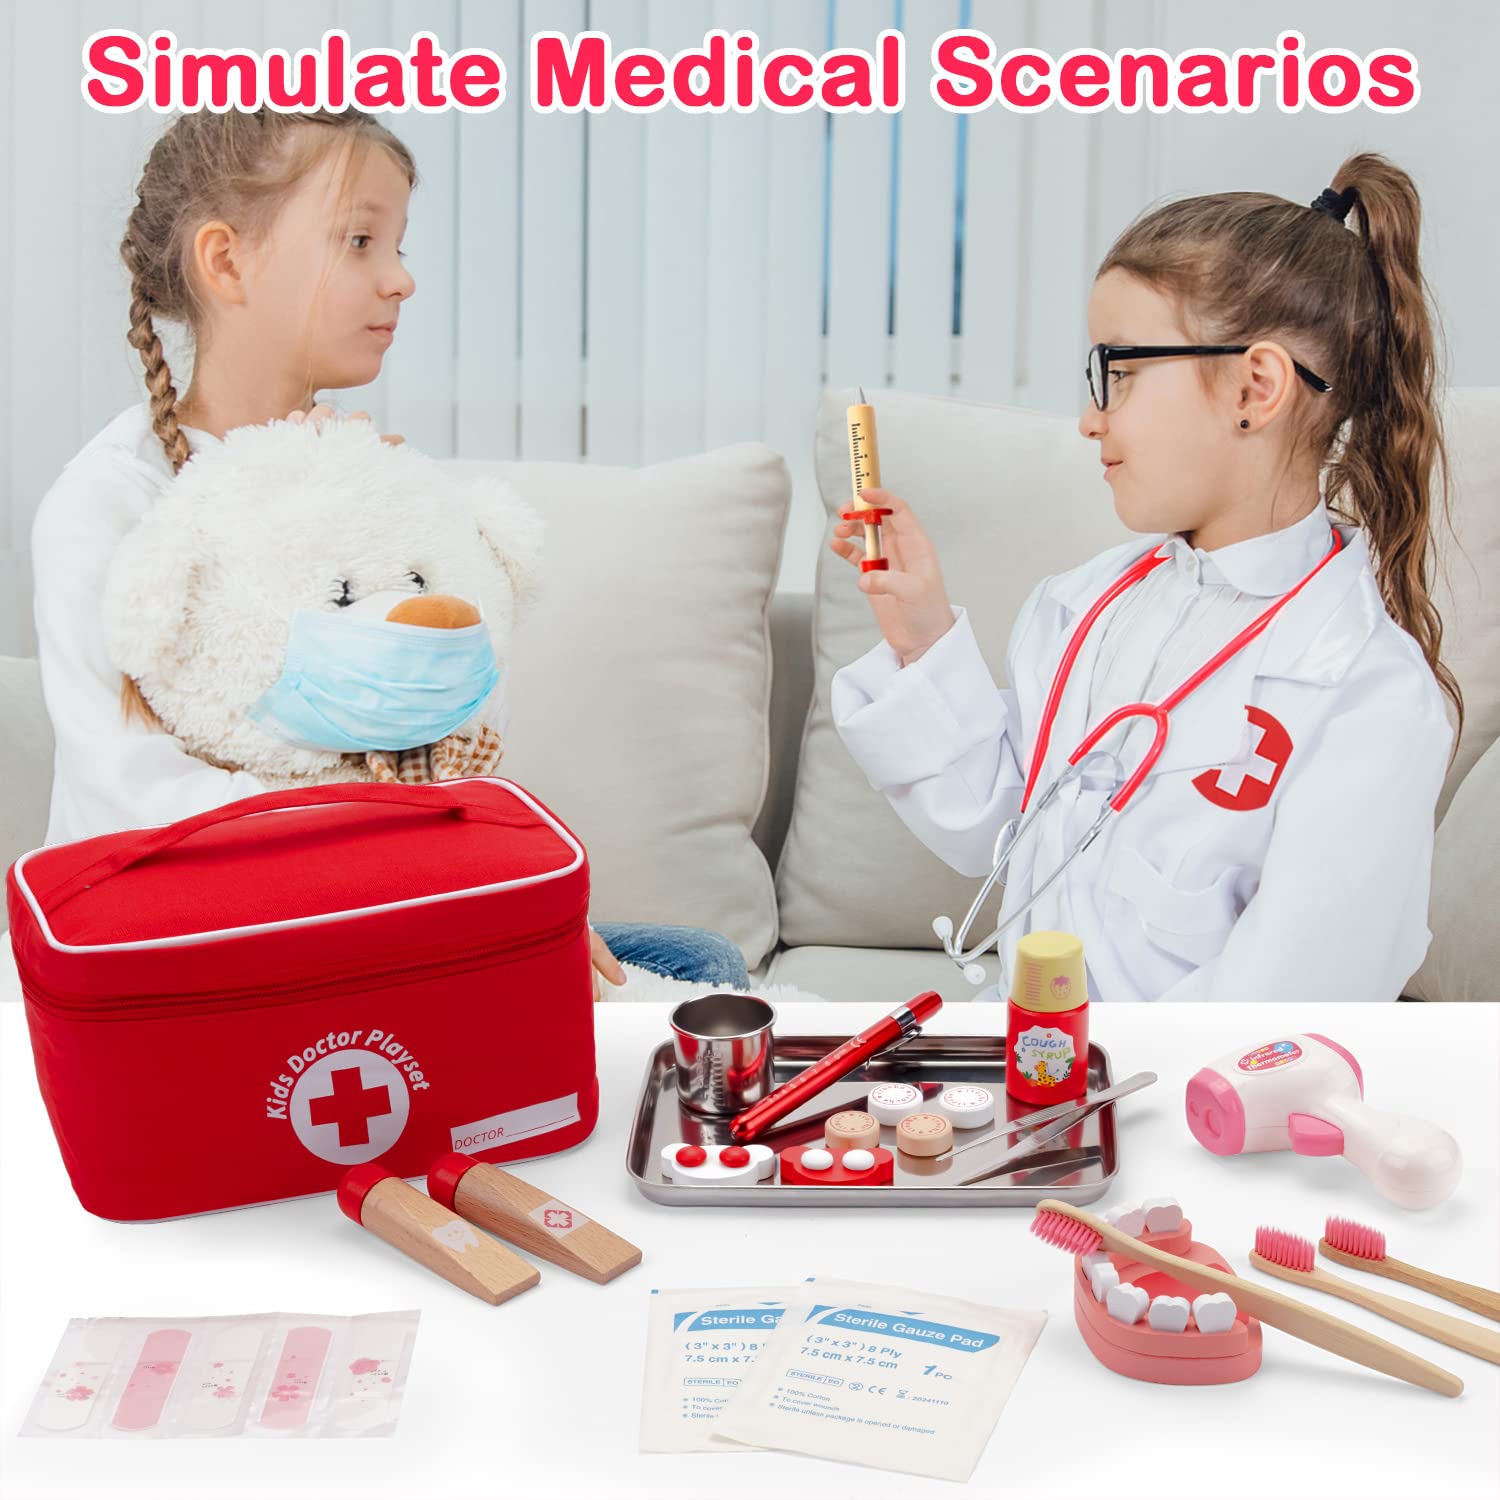 KODATEK Doctor Kit for Kids, 33 Pcs Pretend Play Medical Toys Set, Roleplay Doctor Costume, Wooden Accessories, Flashlight, Tray, Stain Steel Stethoscope, Dentist Kit Toys for Kids, Toddlers, Girls